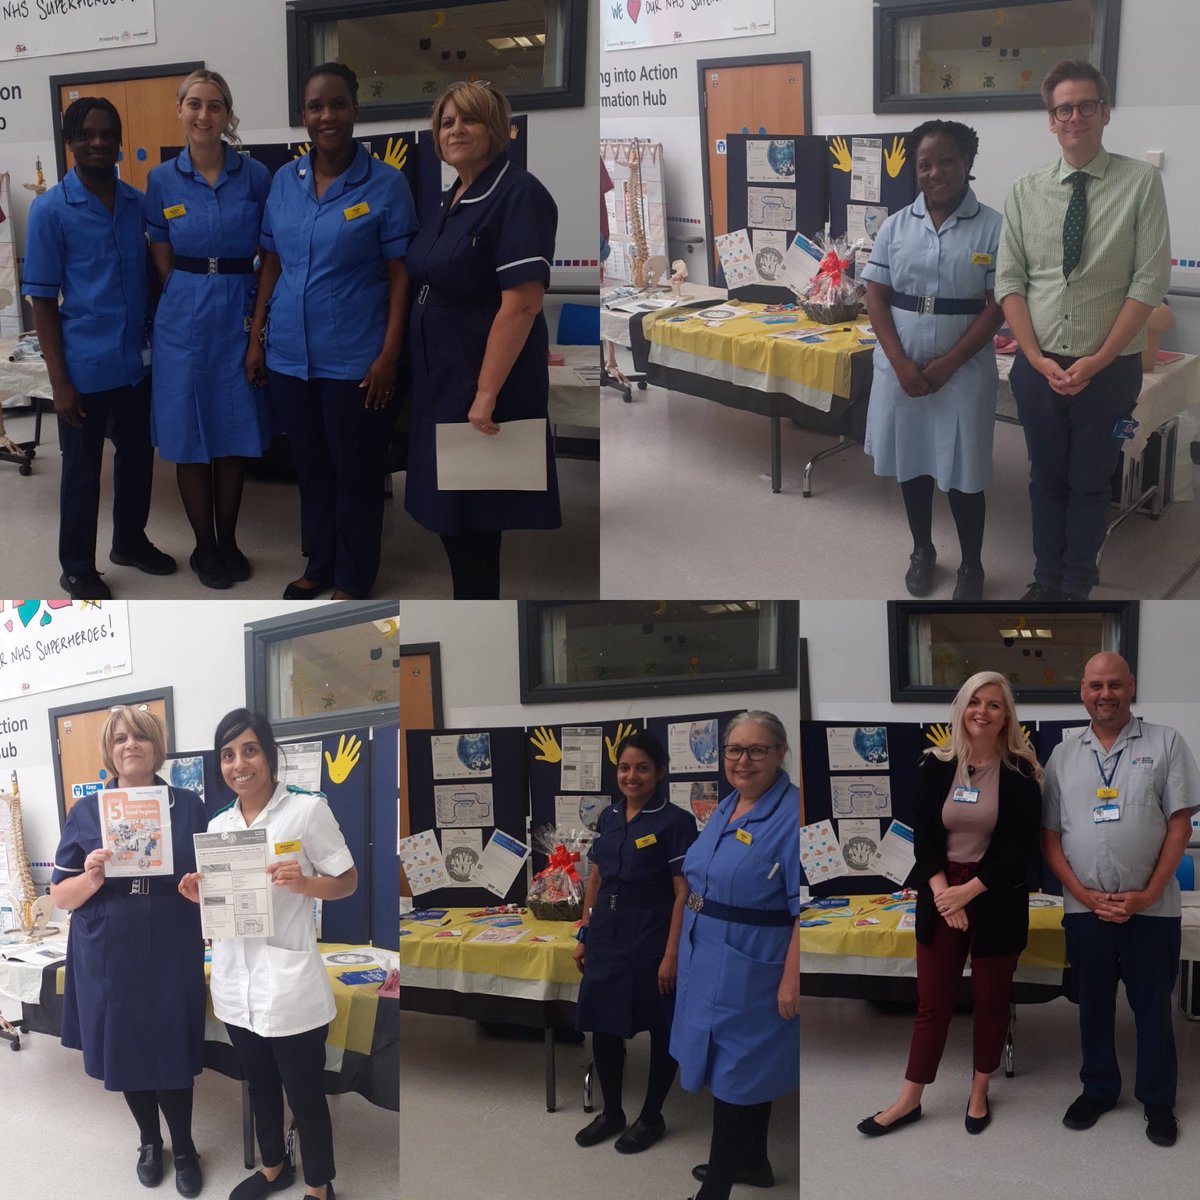 Senior IPN Ann promoting the importance of preventing #SurgicalSiteInfections over 108 staff stopped today to engage, learn and spread the good practice! #Walsallandproud ✨